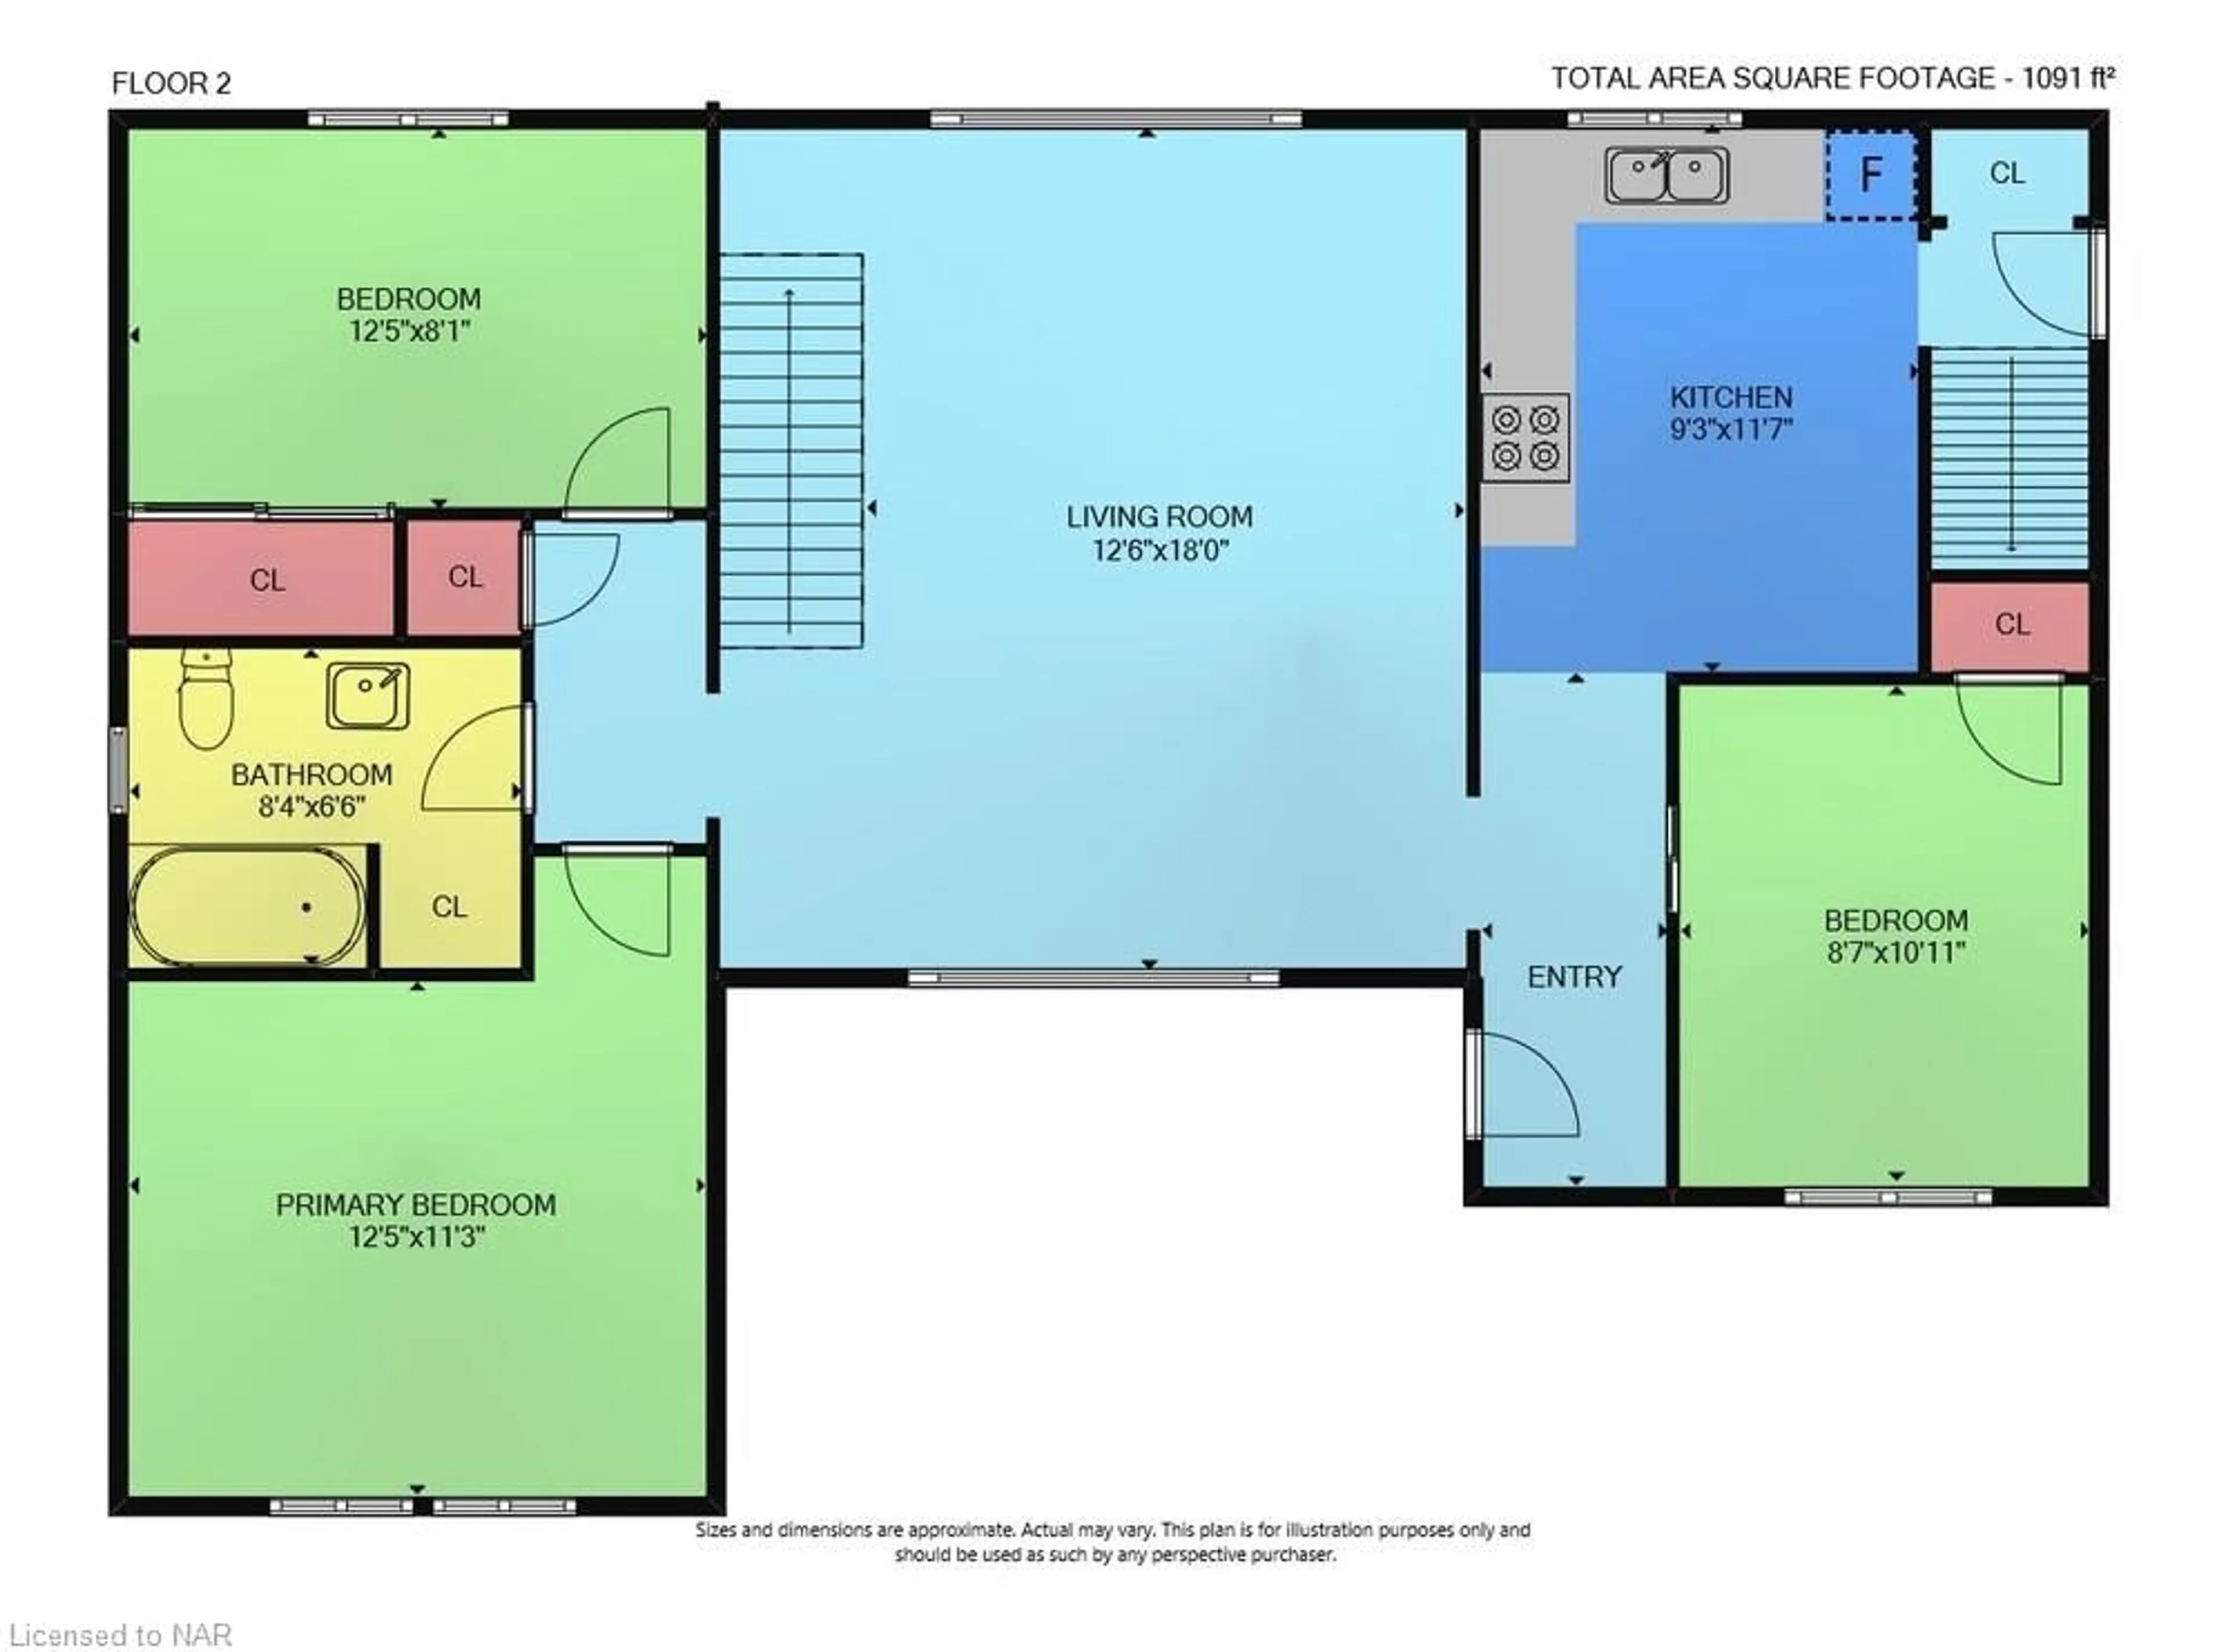 Floor plan for 35 Hewko St, St. Catharines Ontario L2N 2E5